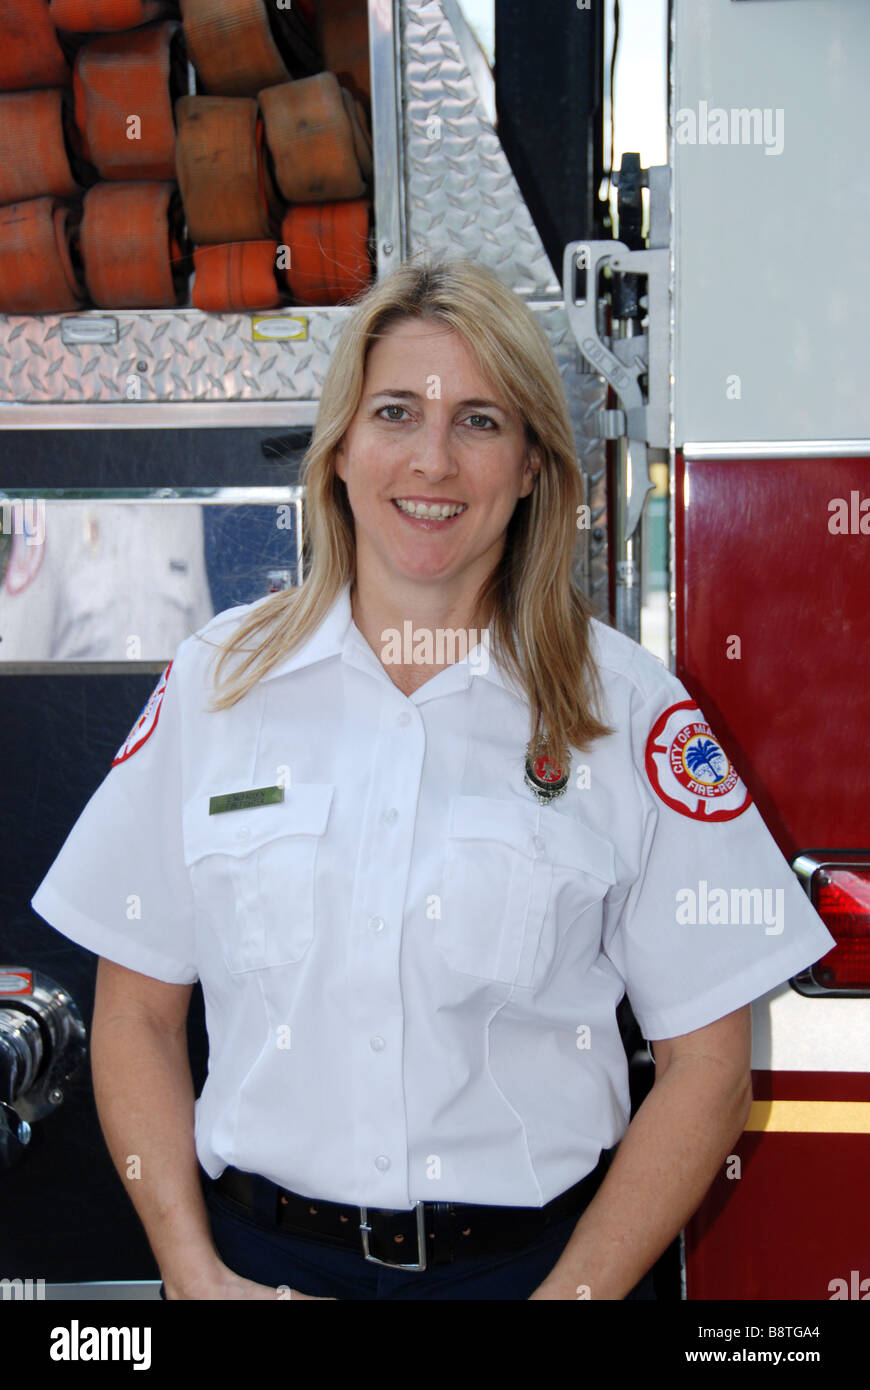 Smiling female firefighter paramedic in dress uniform posing in front of fire engine Stock Photo